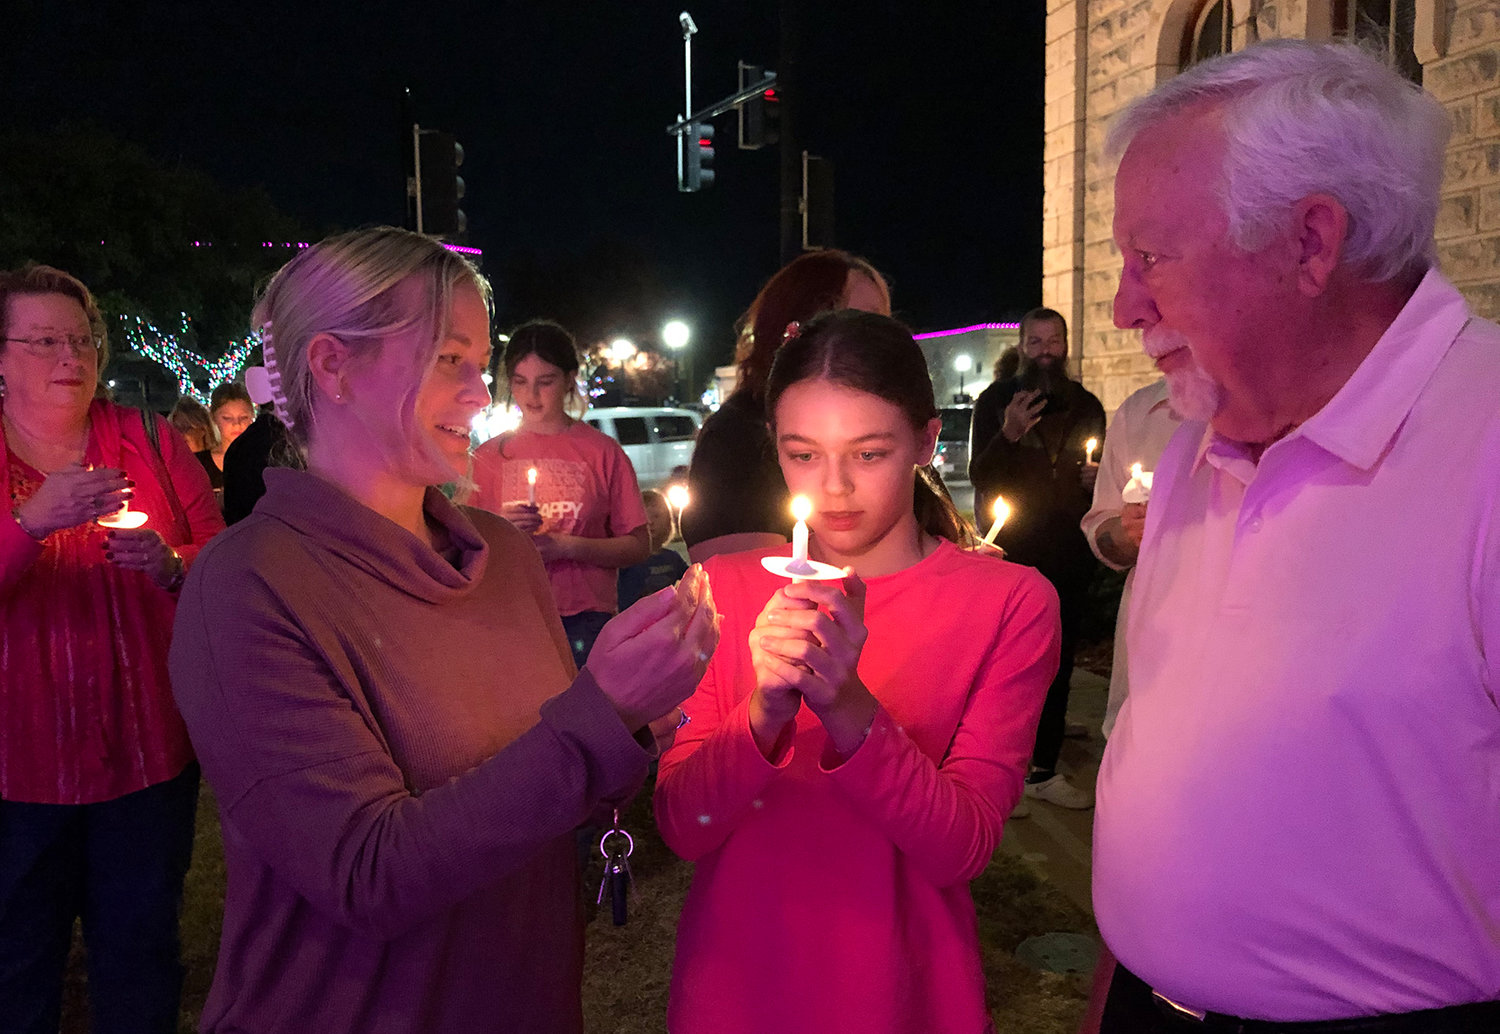 Leslie and Ella Folsum were among the people who gathered to show support for the family of Athena Strand at a Tuesday night vigil. They are shown speaking with Van Houser, pastor at North Side Baptist Church in Weatherford.